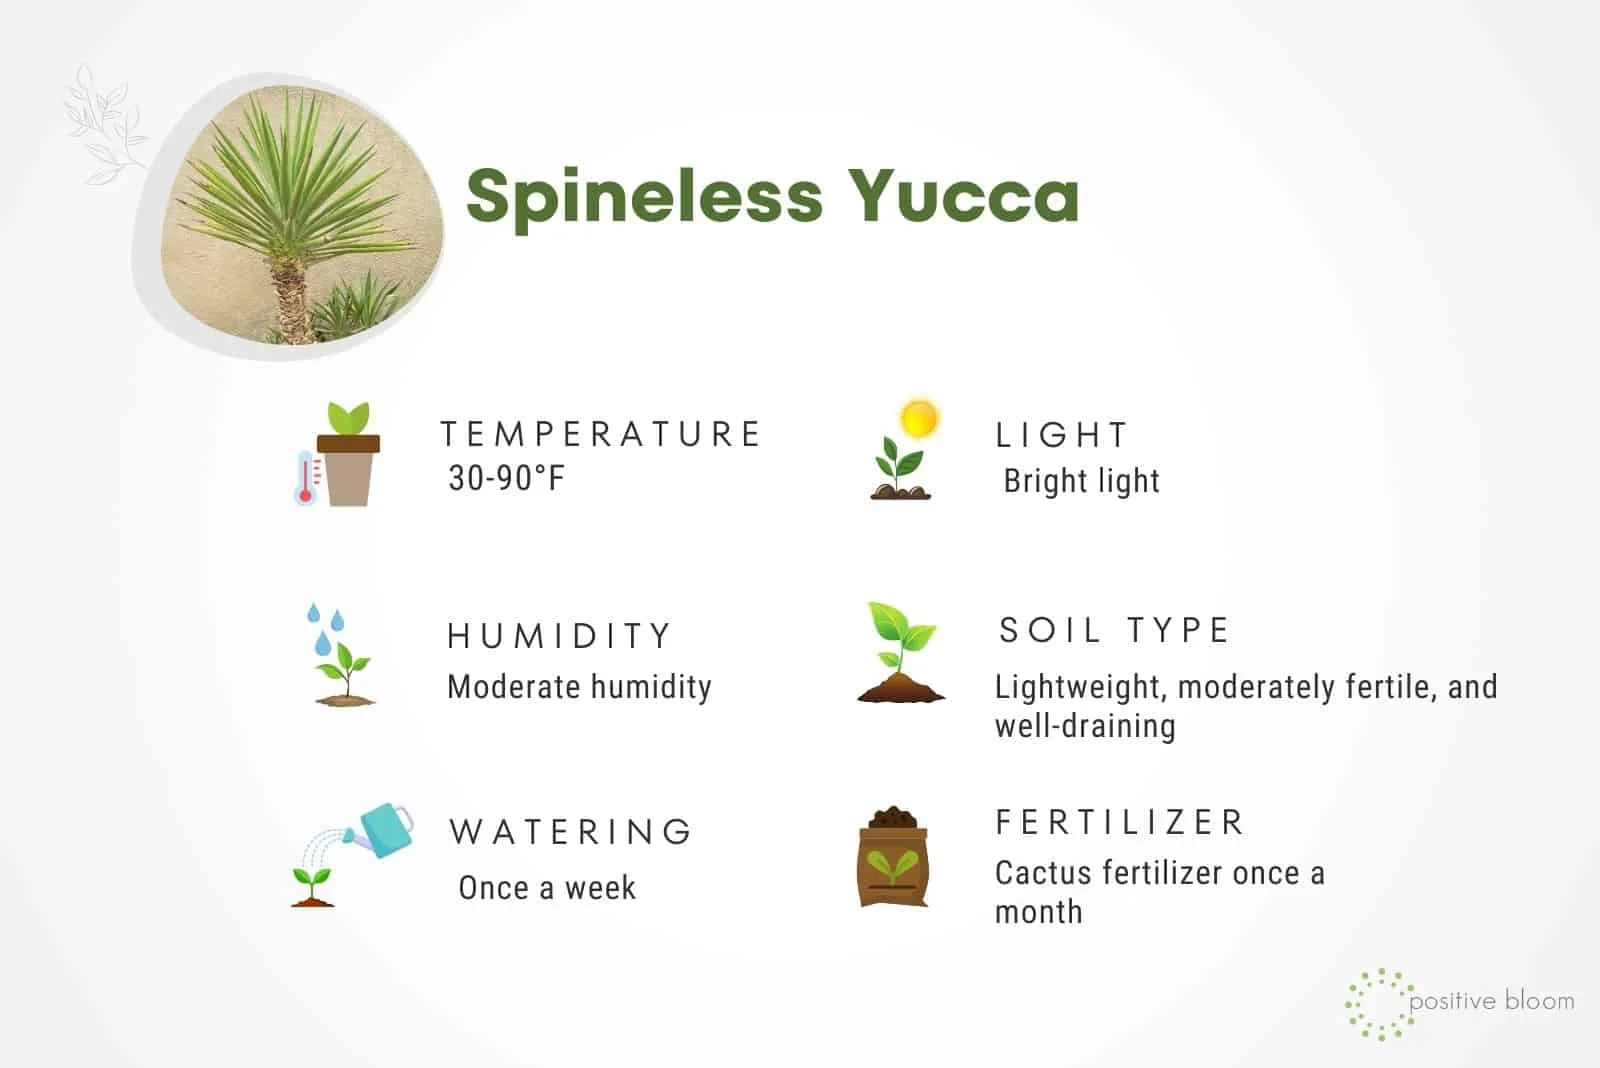 How To Care For The Spineless Yucca